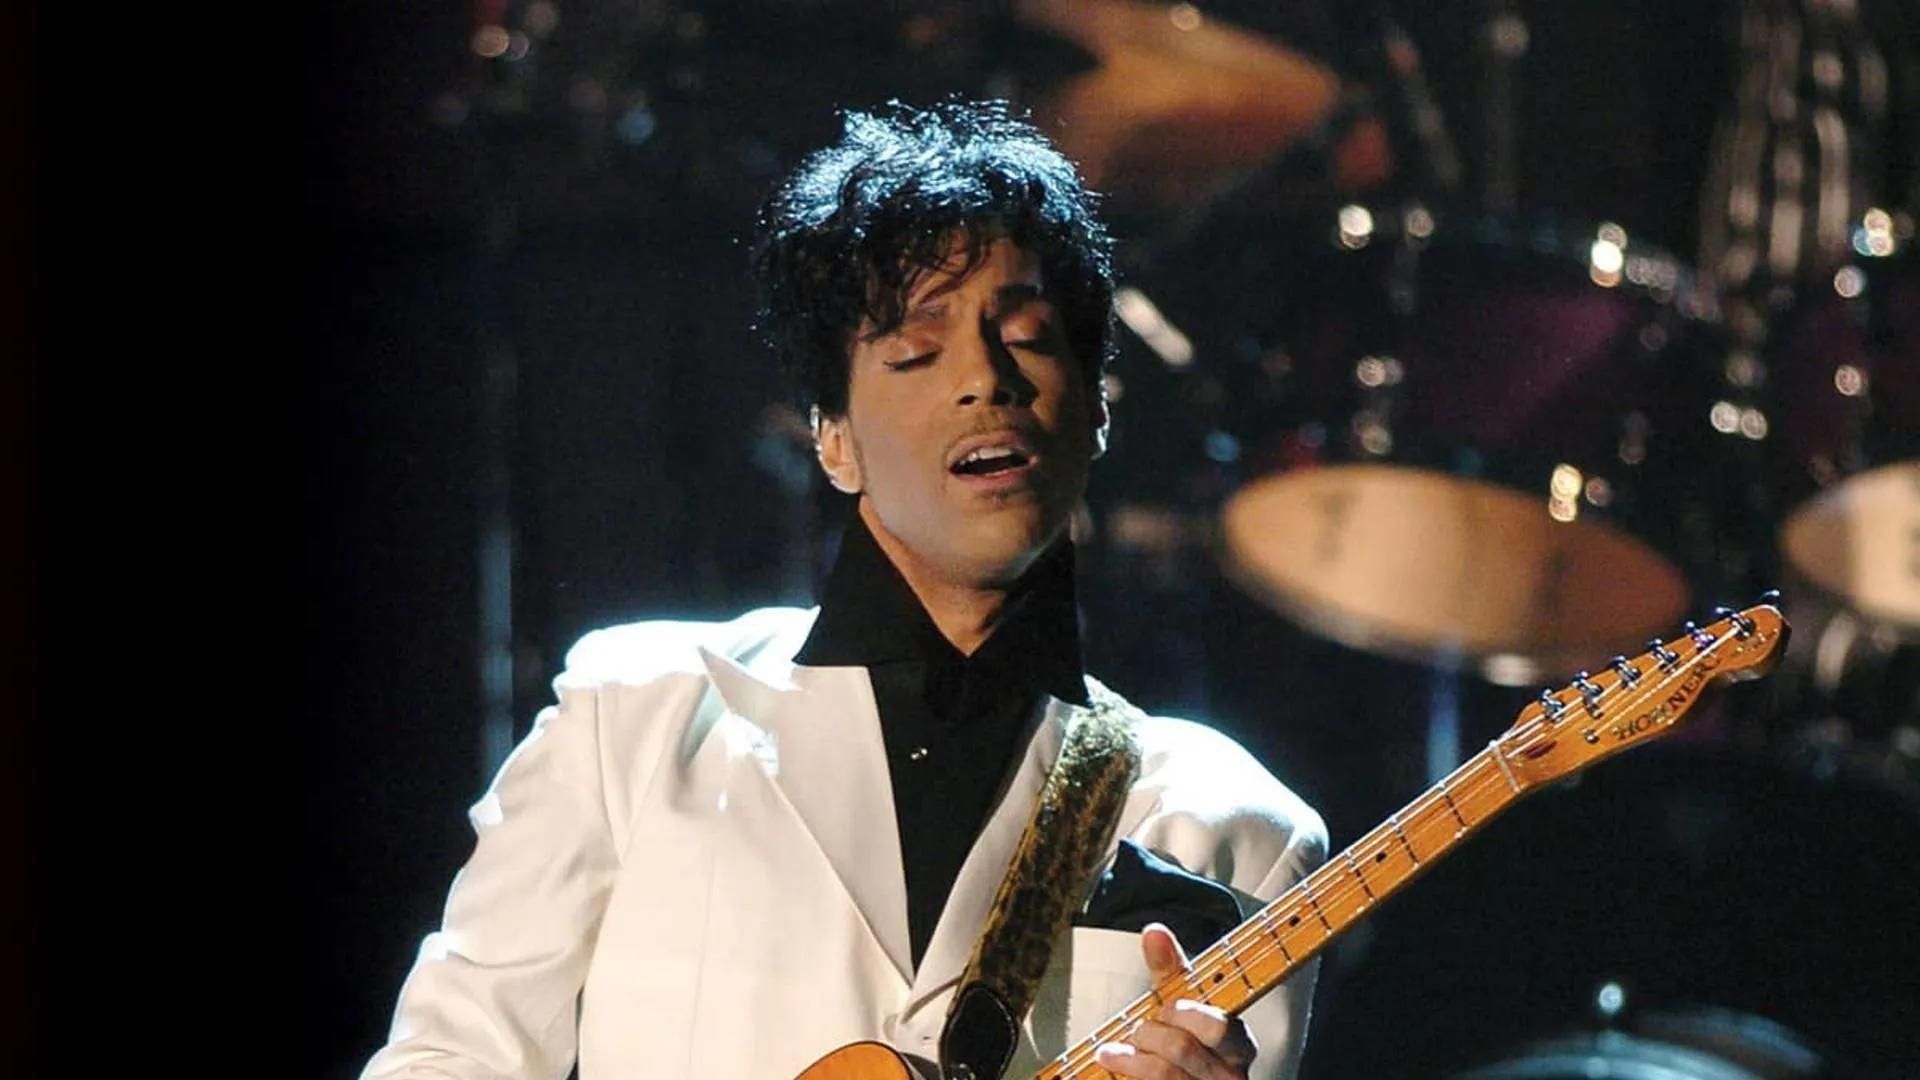 Prince Performing With His Guitar